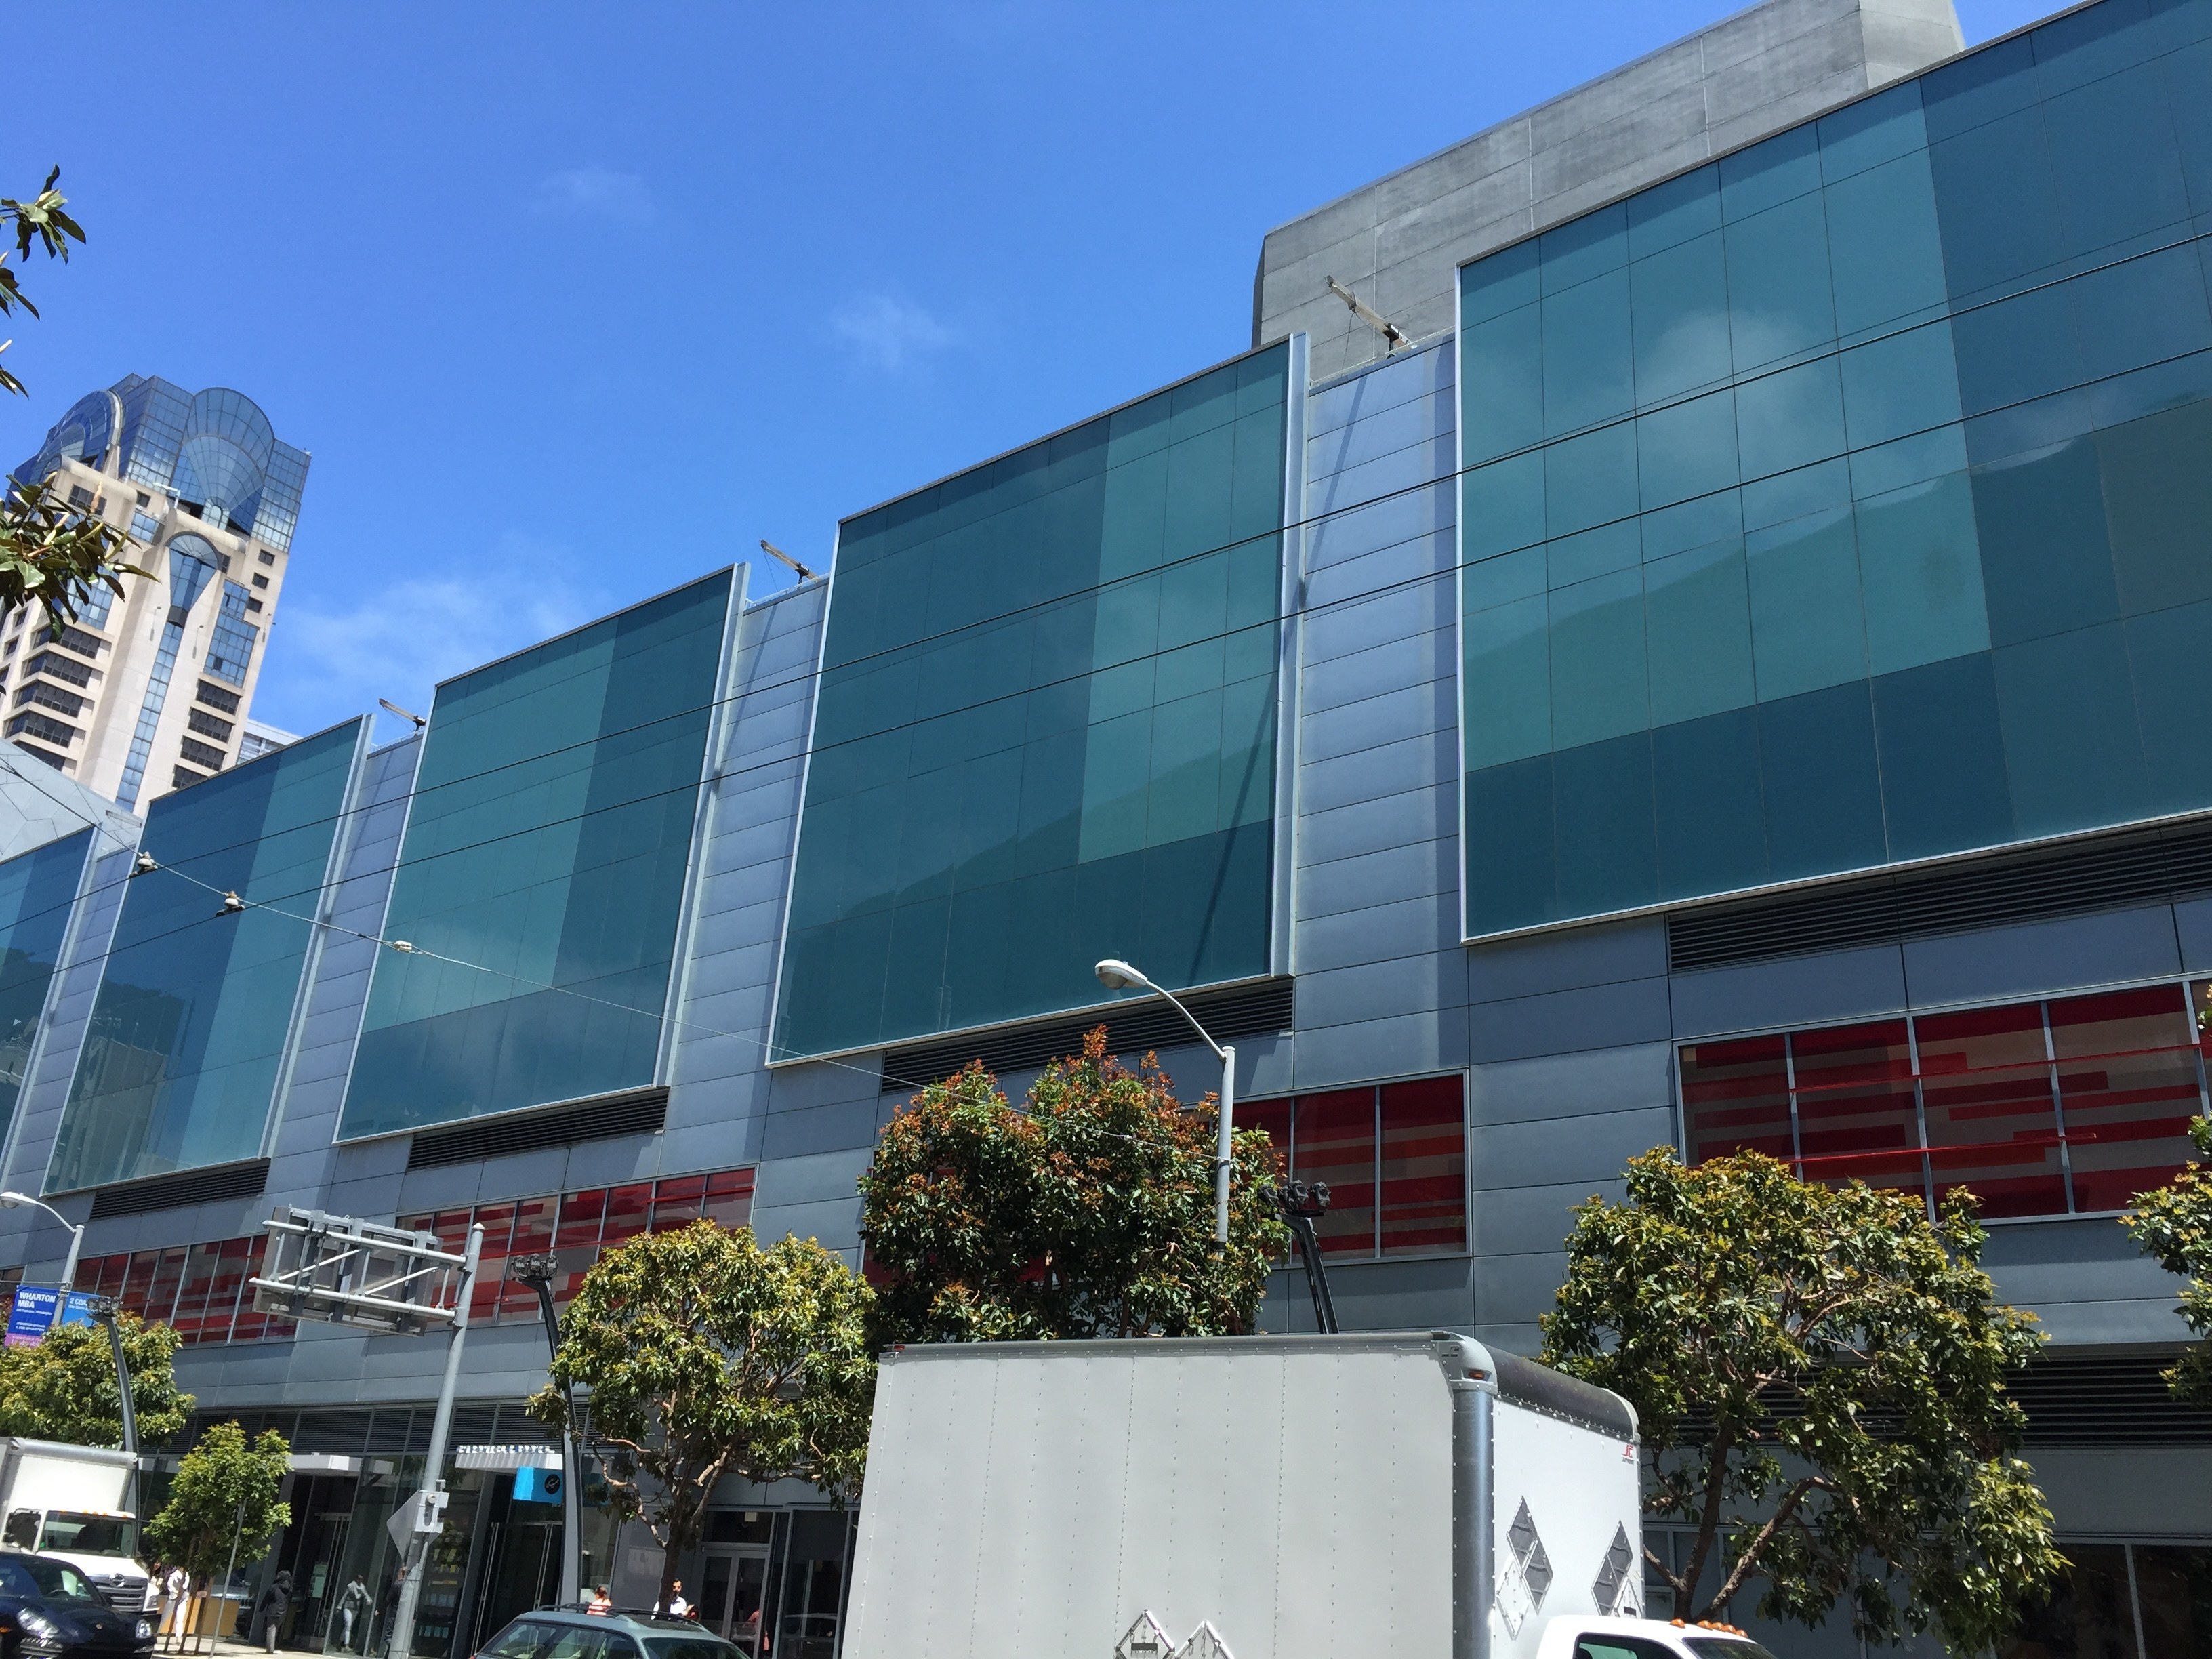 More WWDC banners will likely be displayed here over the next few days.